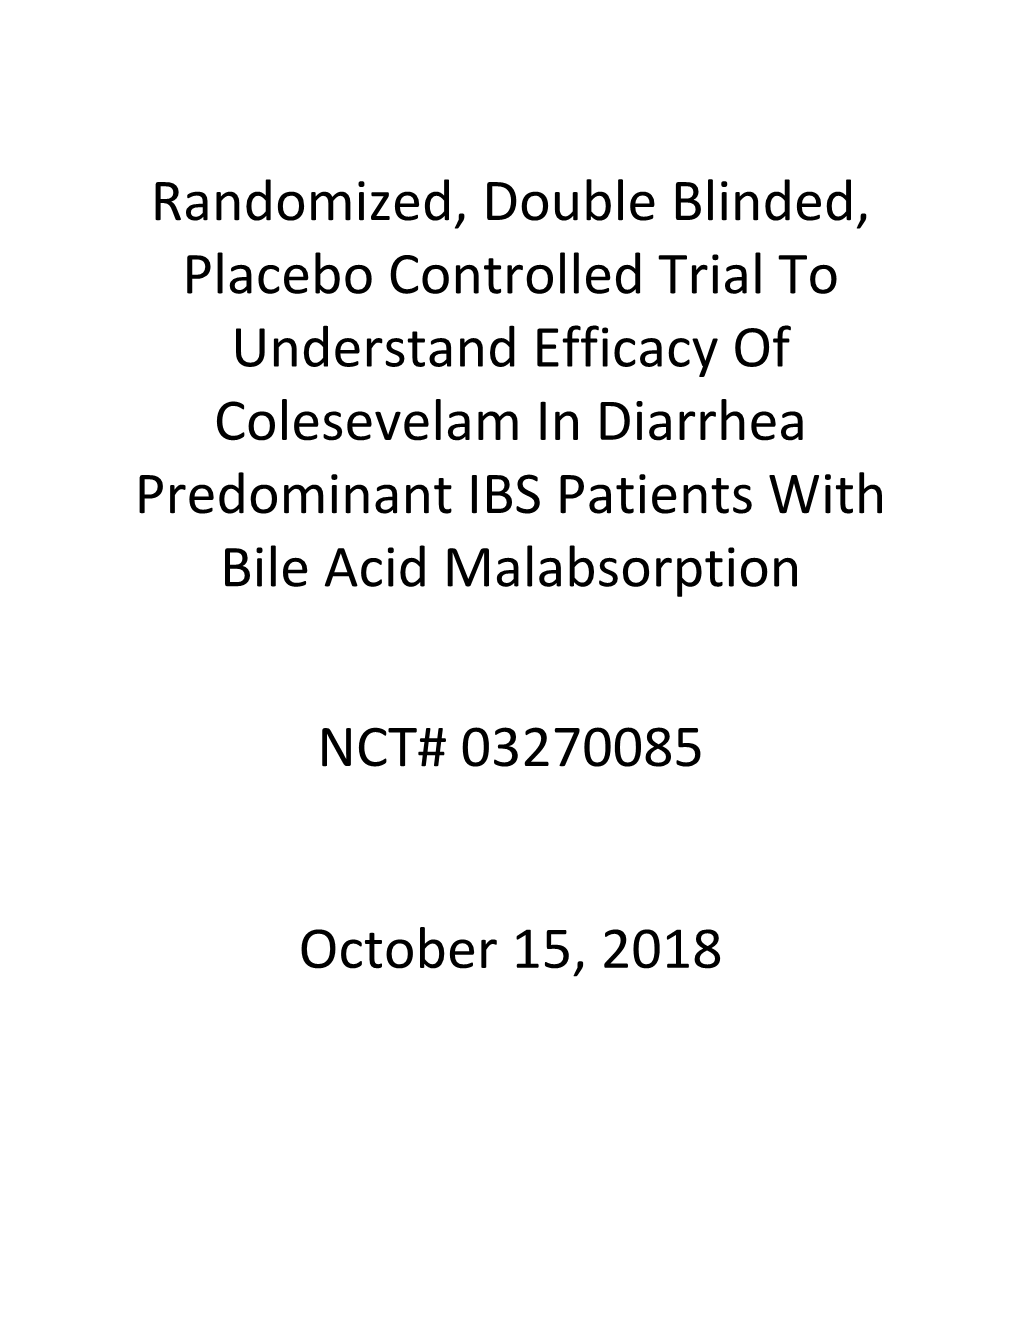 Randomized, Double Blinded, Placebo Controlled Trial to Understand Efficacy of Colesevelam in Diarrhea Predominant IBS Patients with Bile Acid Malabsorption